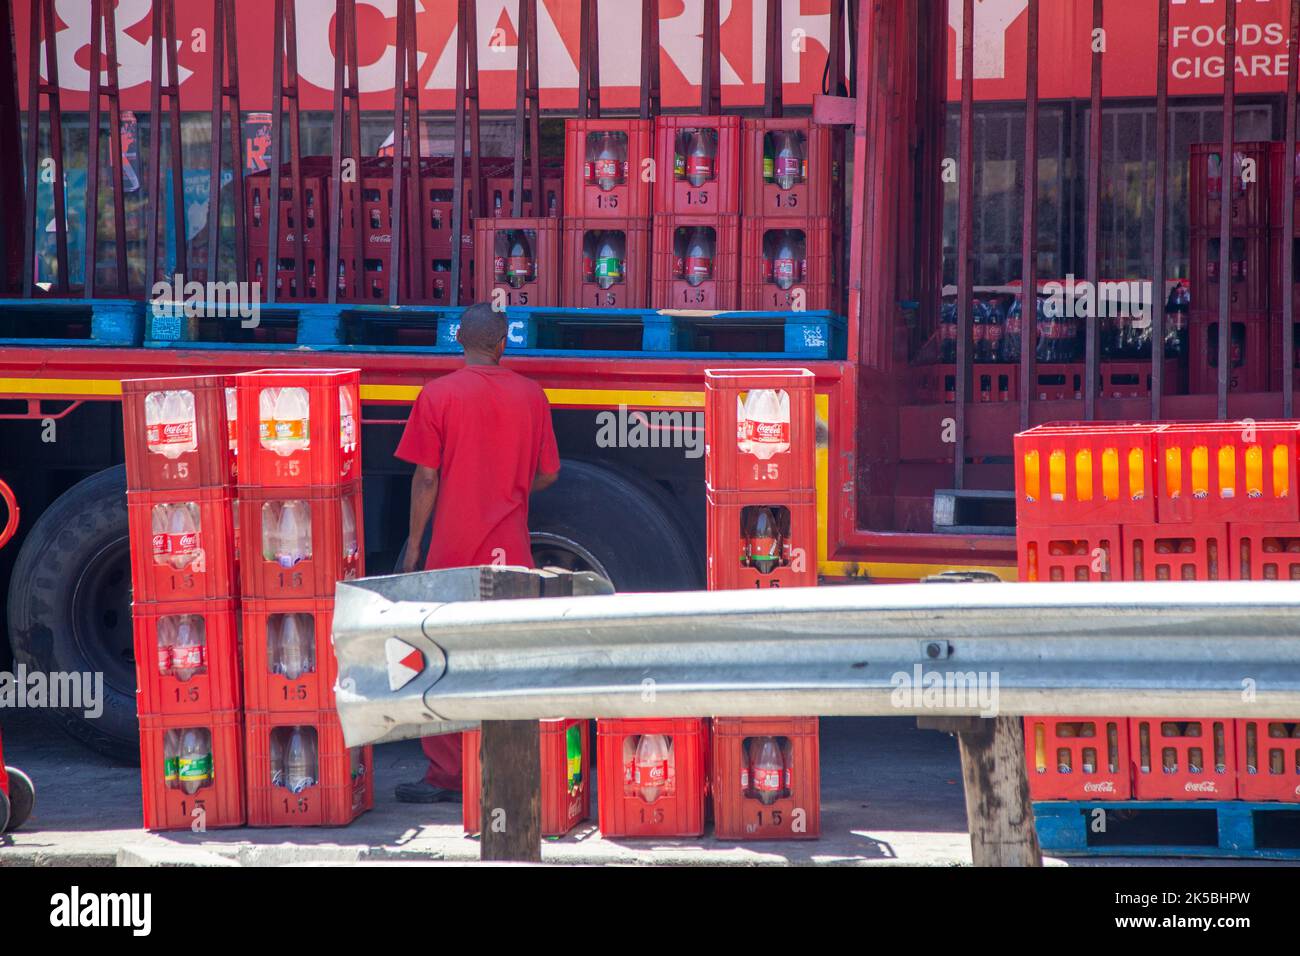 Delivering Bottles of Coca Cola and collecting empties in Cape Town City, South Africa Stock Photo